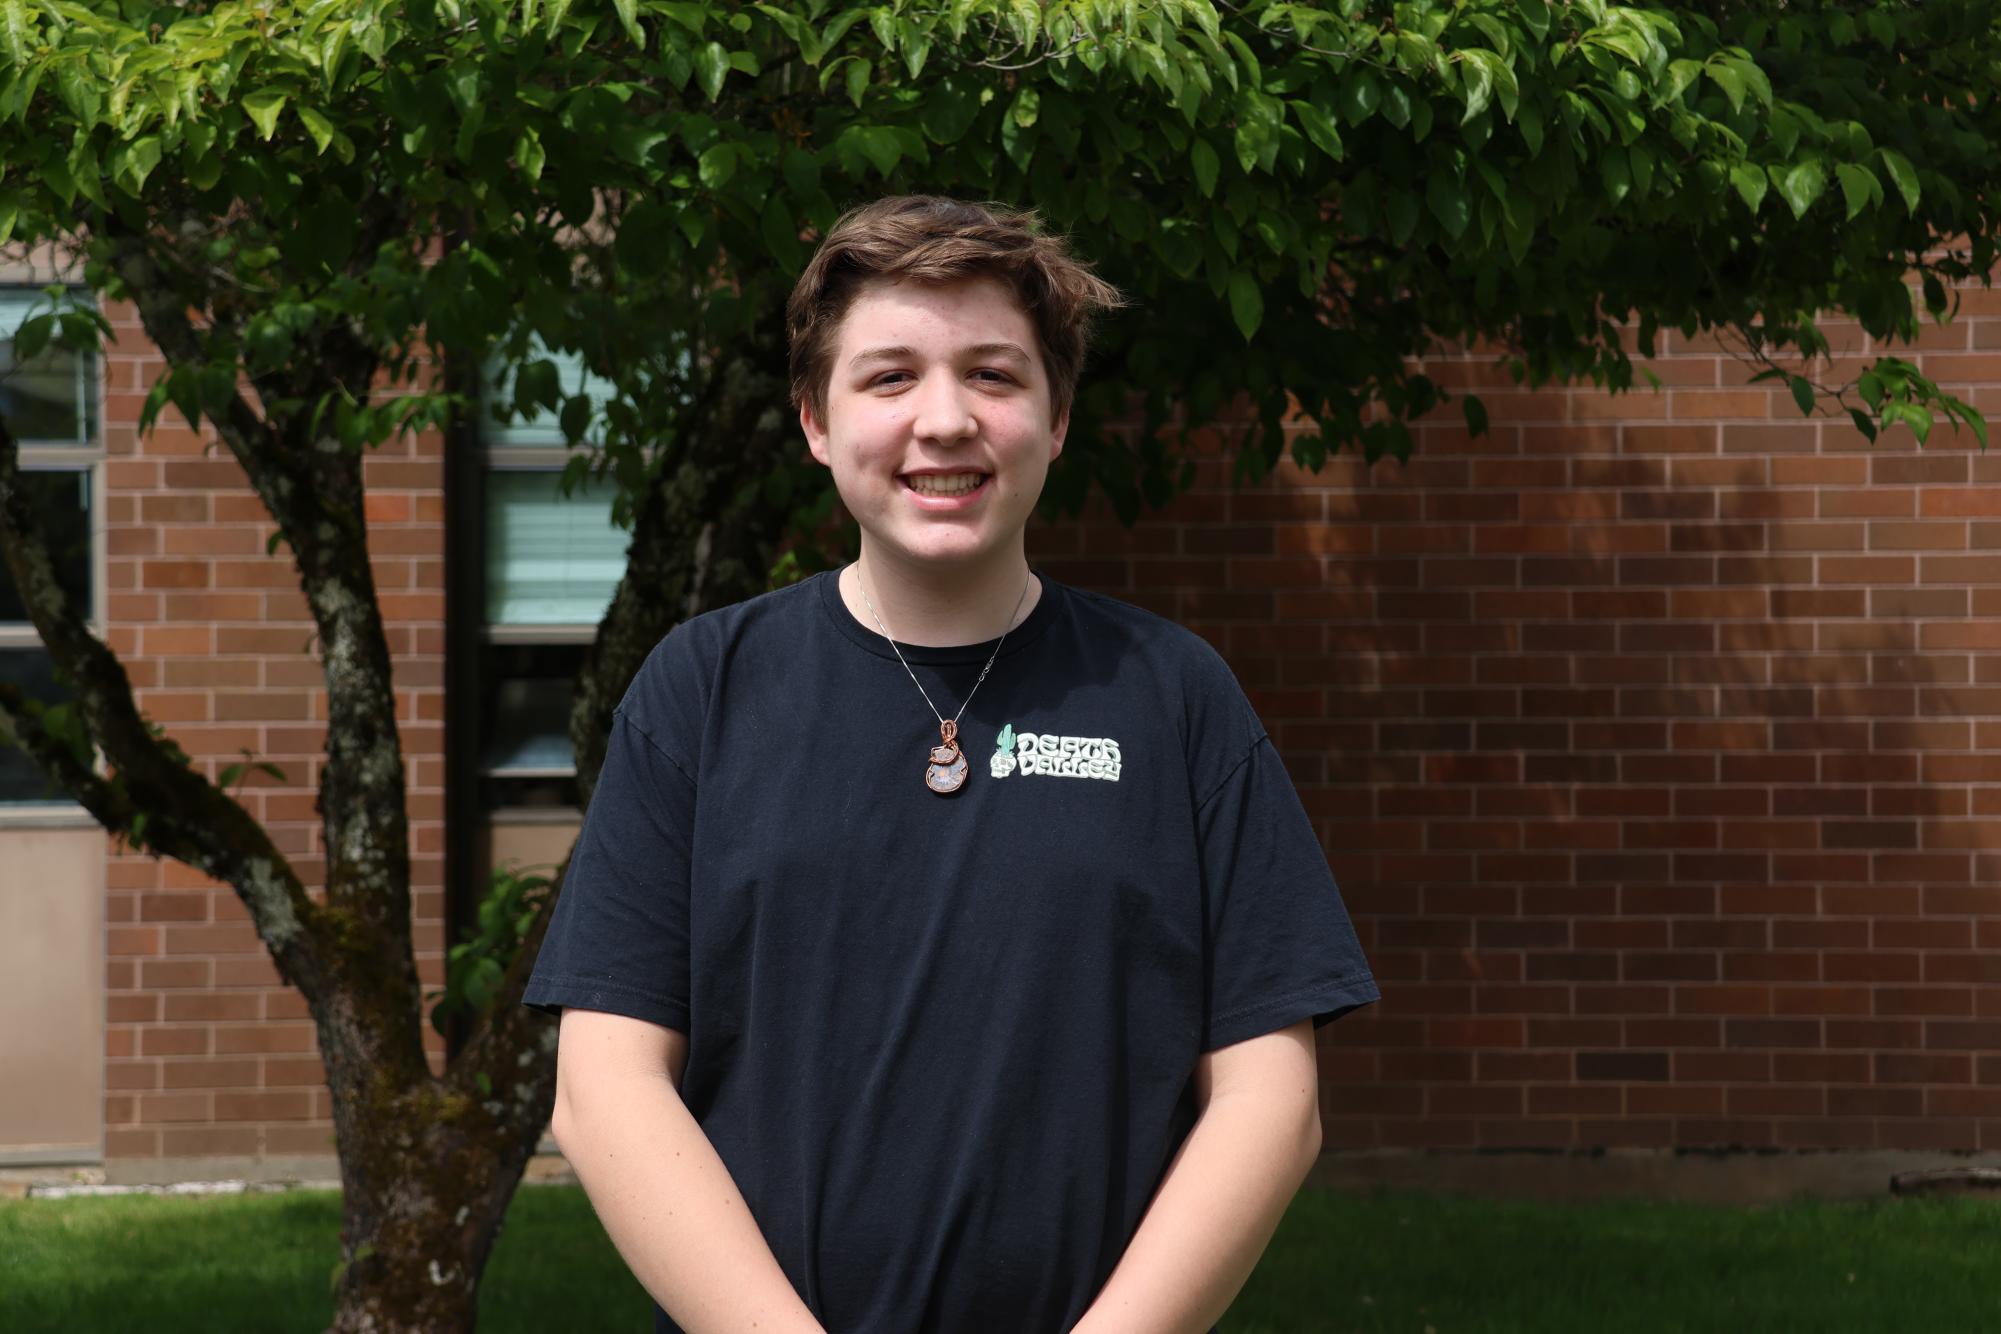 Freshman Jackson Sprando came to La Salle from St. John the Baptist Catholic School, and after a full year in high school, he reflects on the friends he’s made, the upperclassmen he’s learned from, and a successful first-ever year in theater.